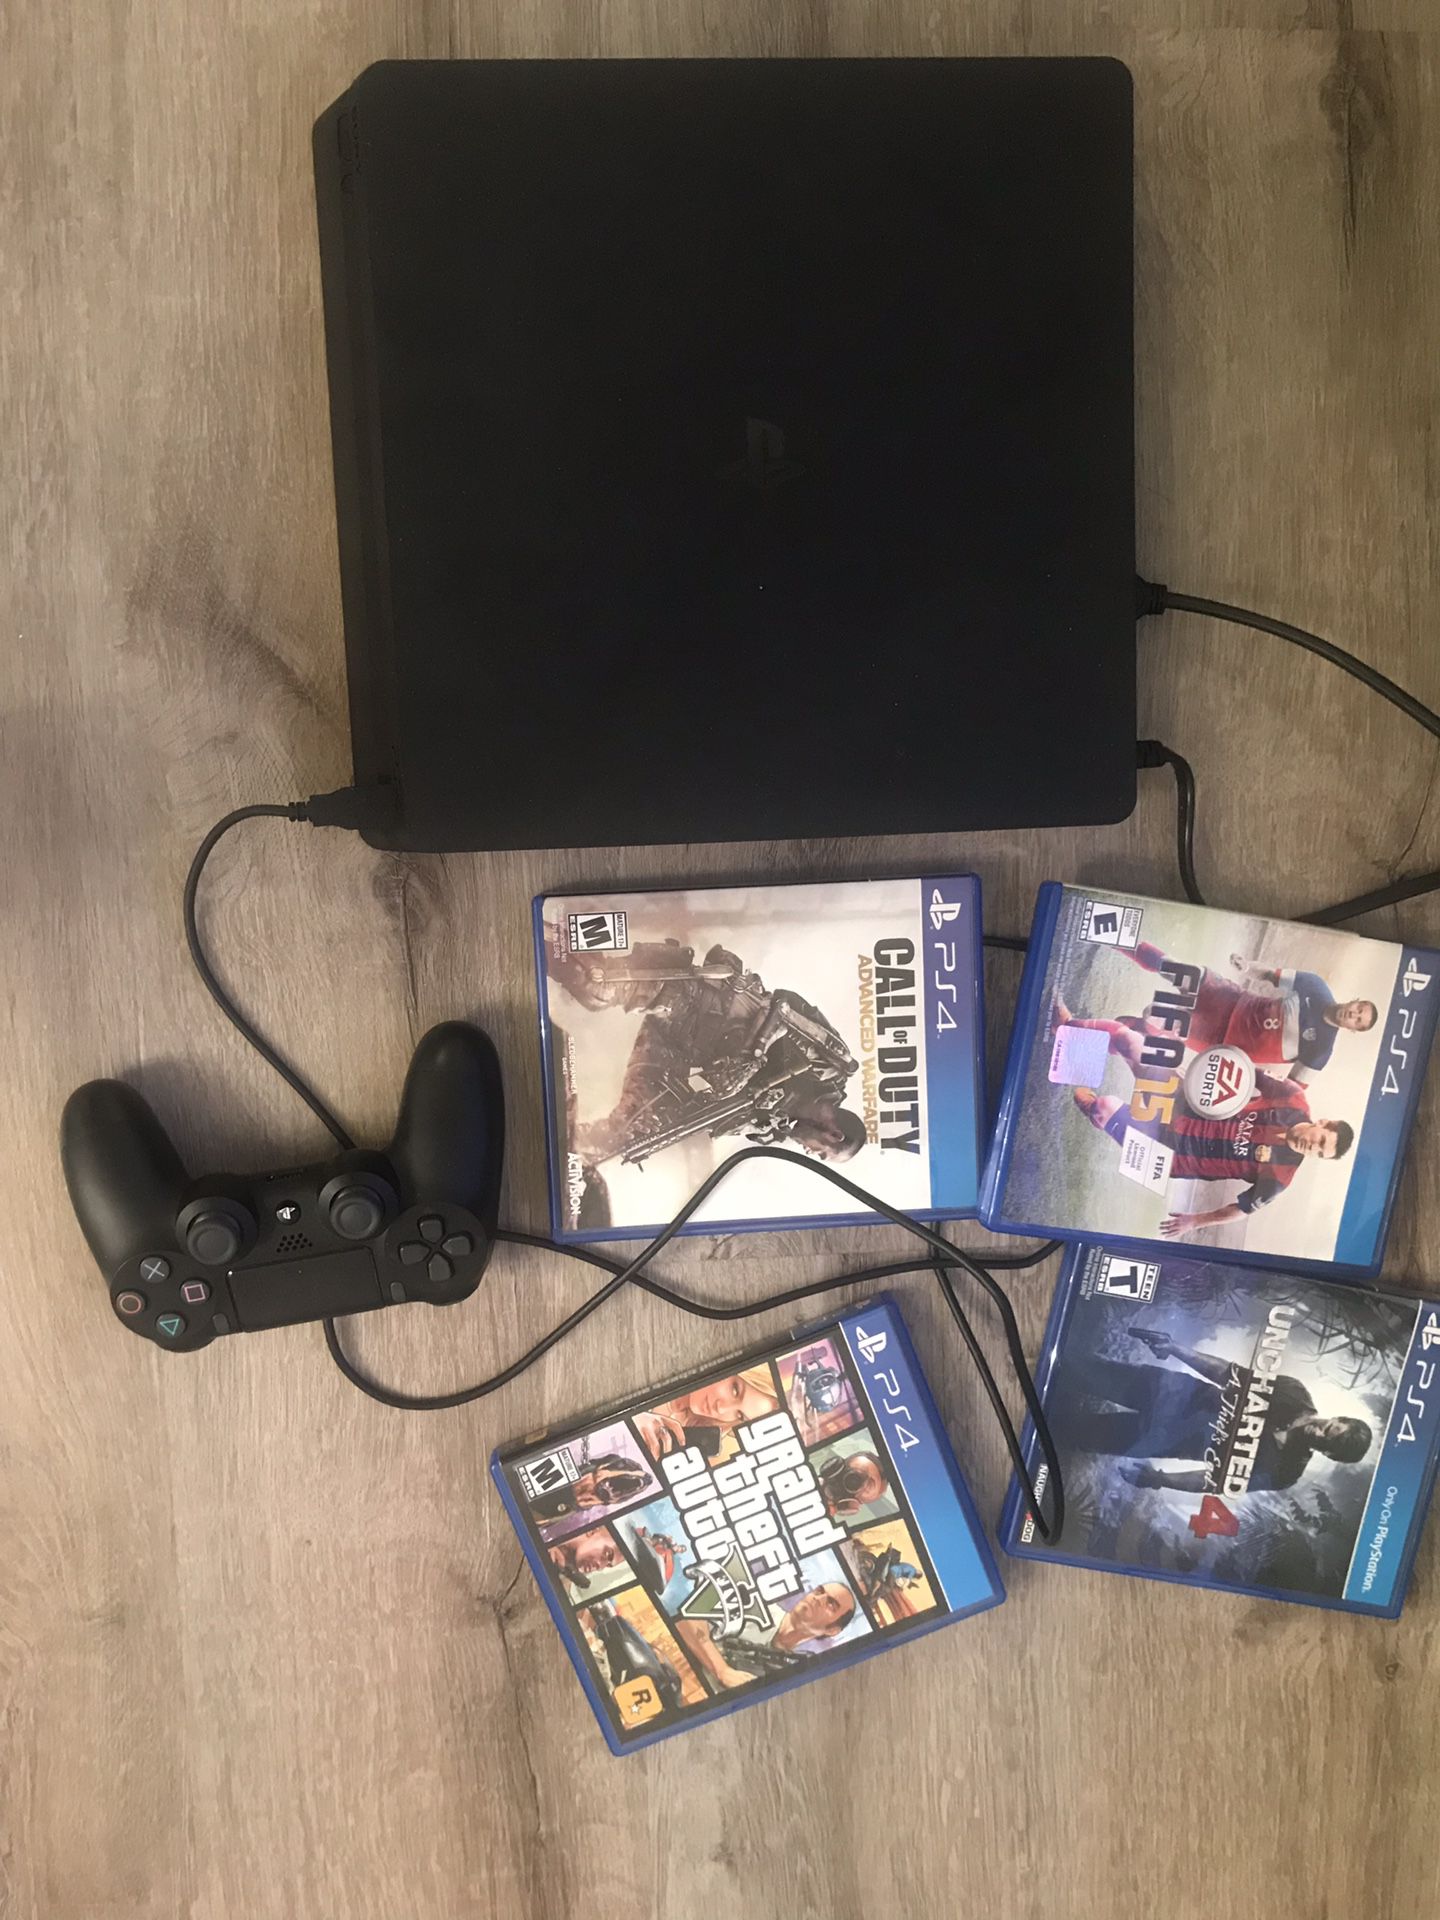 PS4 with Controller and 4 games